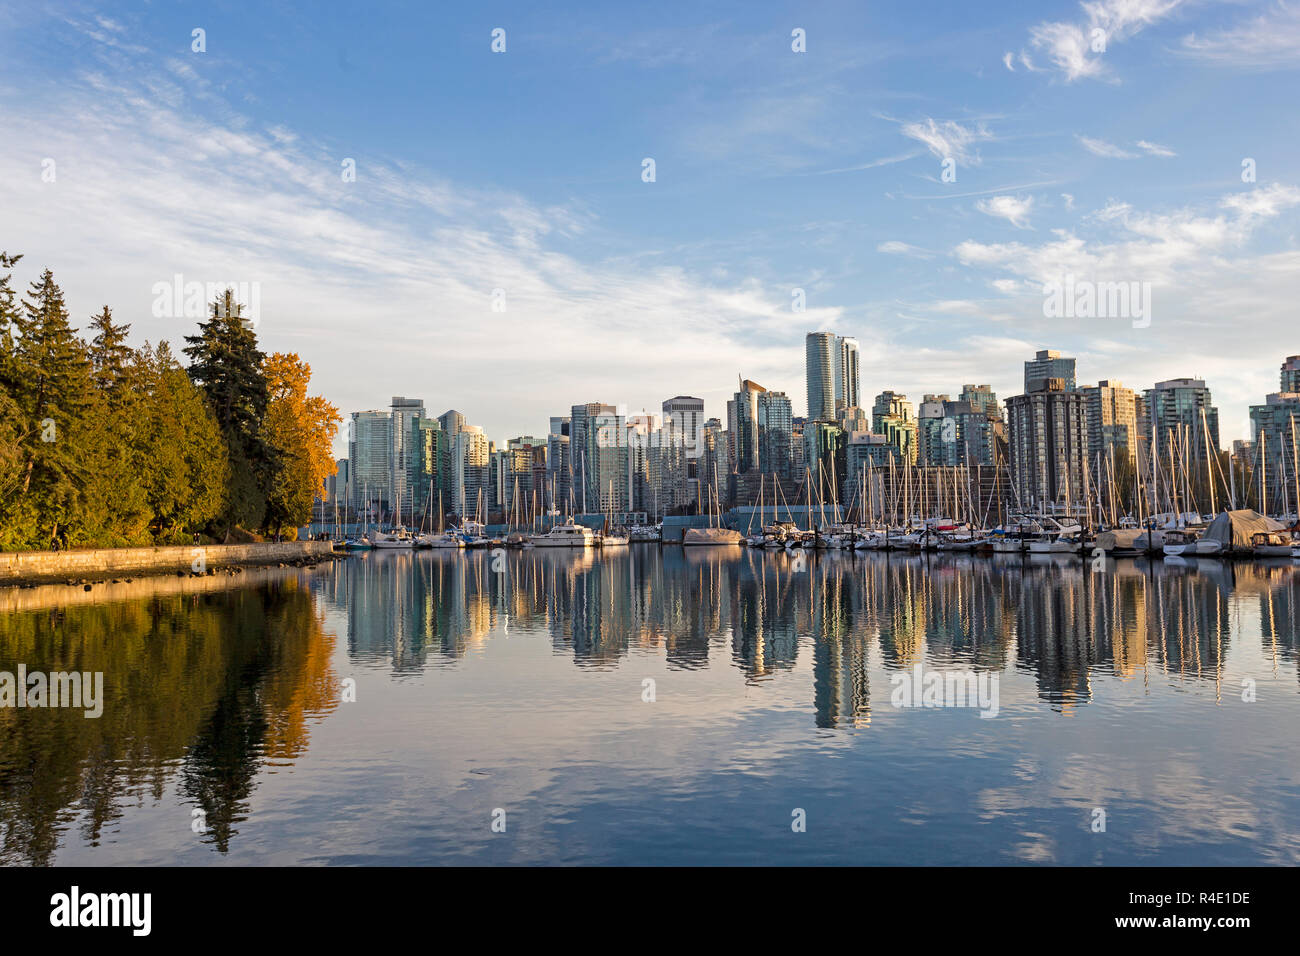 Skyline of Vancouver, British Columbia, with harbor and boats at sunset Stock Photo